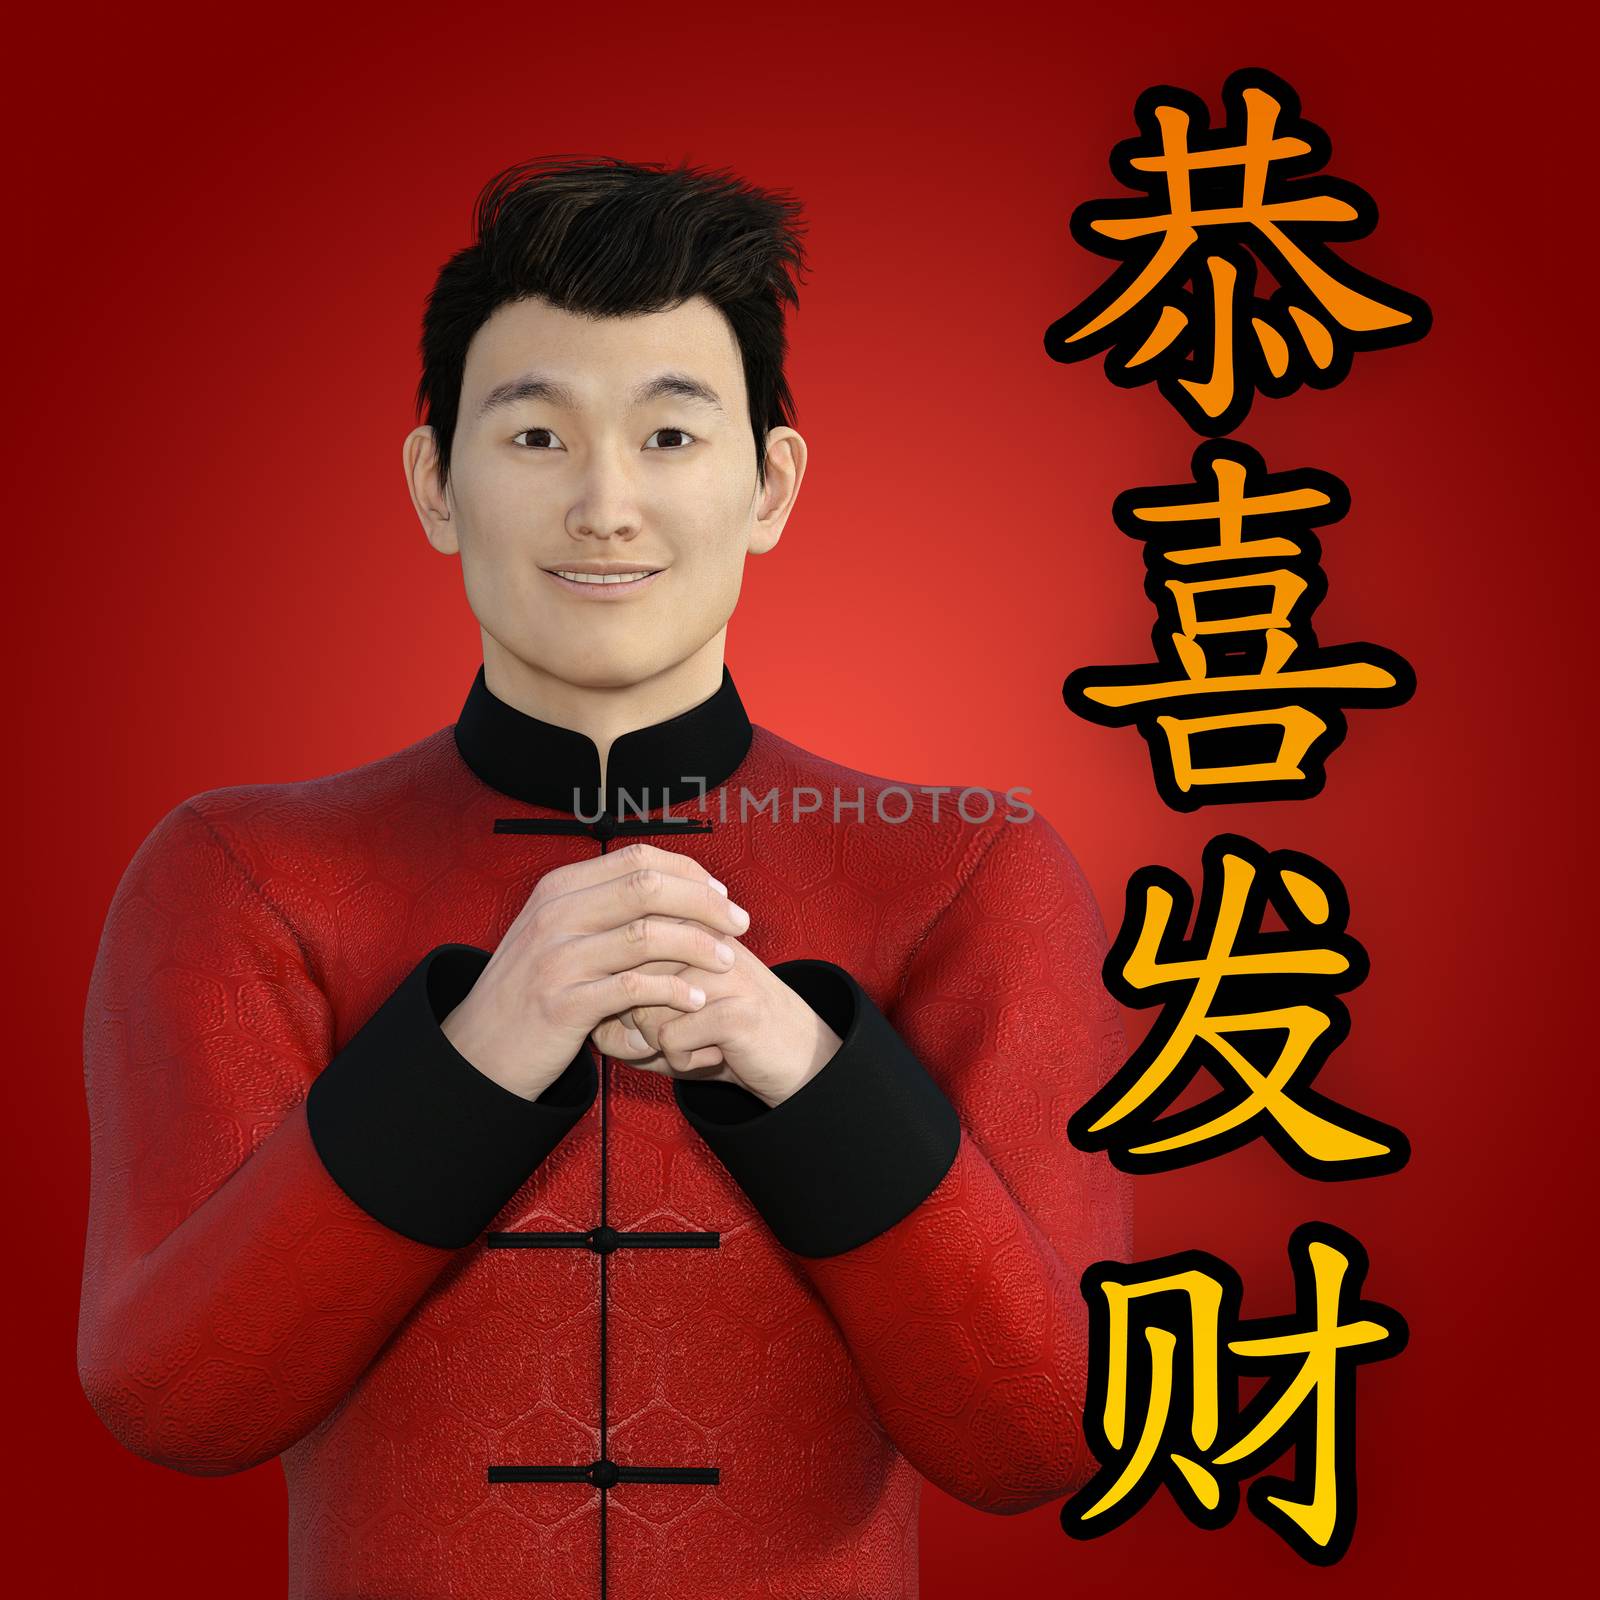 Happy Chinese New Year with Greetings From a Man